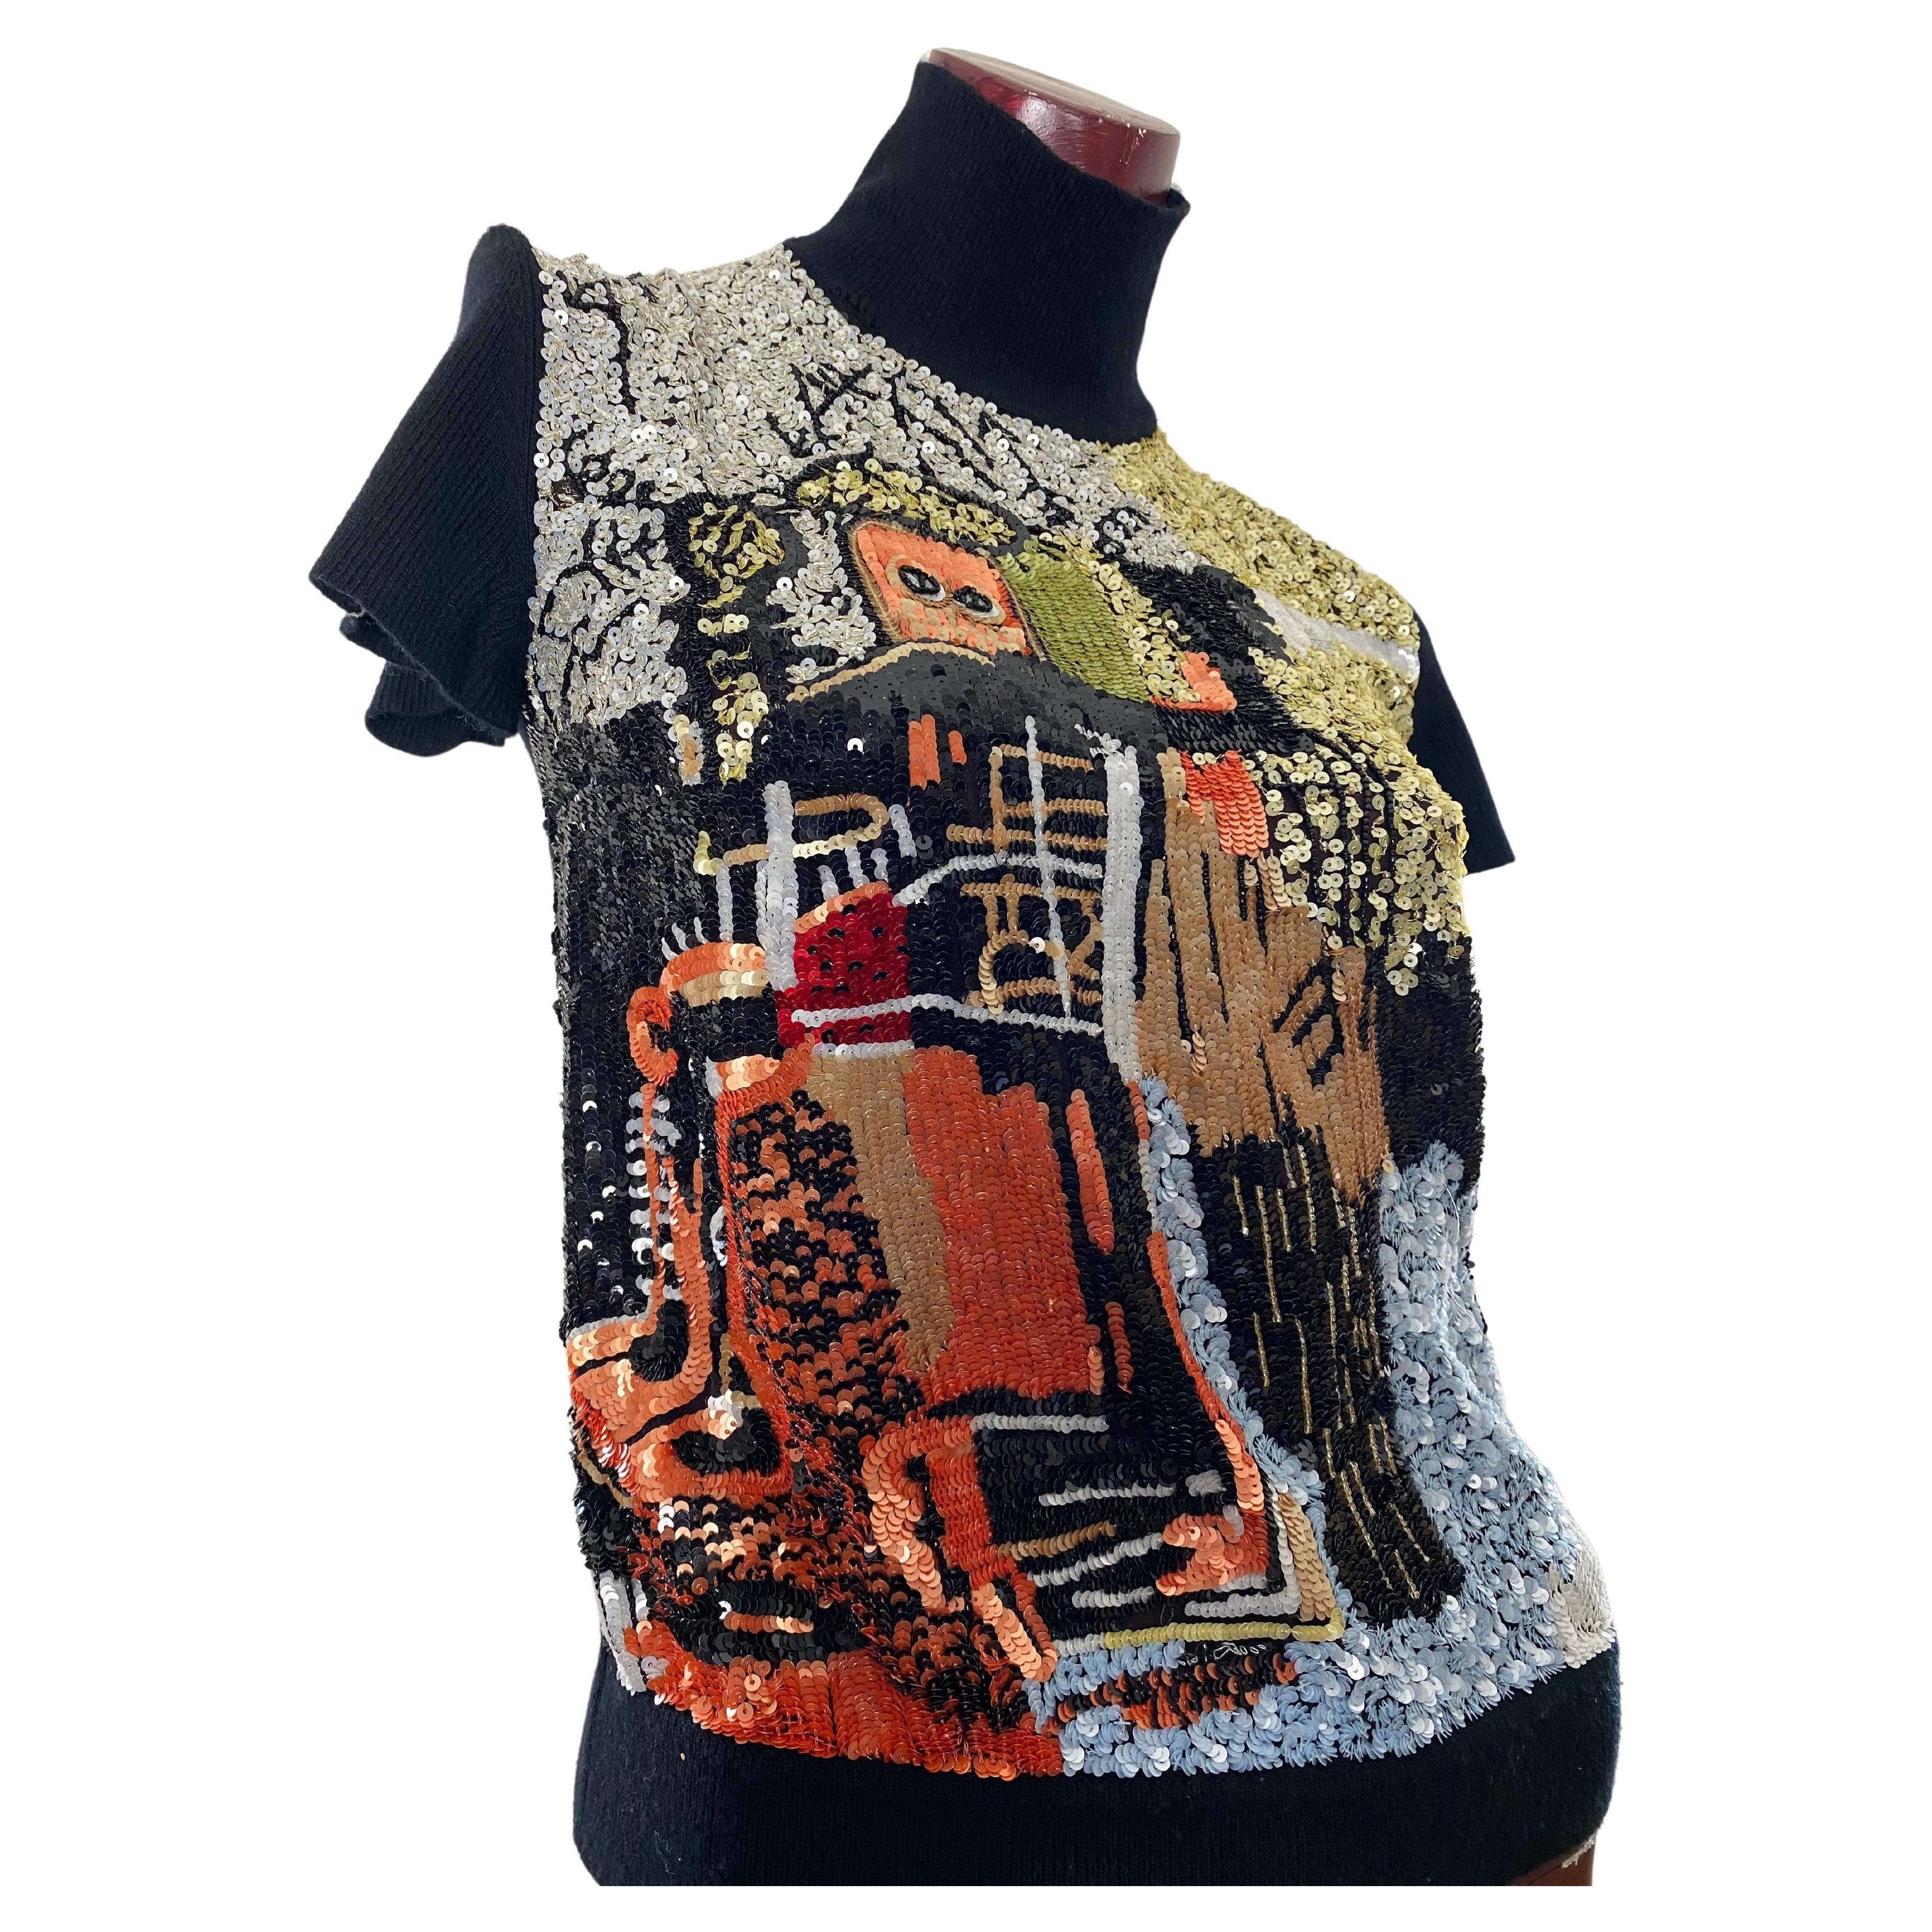 Valentino turtleneck with wonderful pailletes embroidery Basquiat picture For Sale